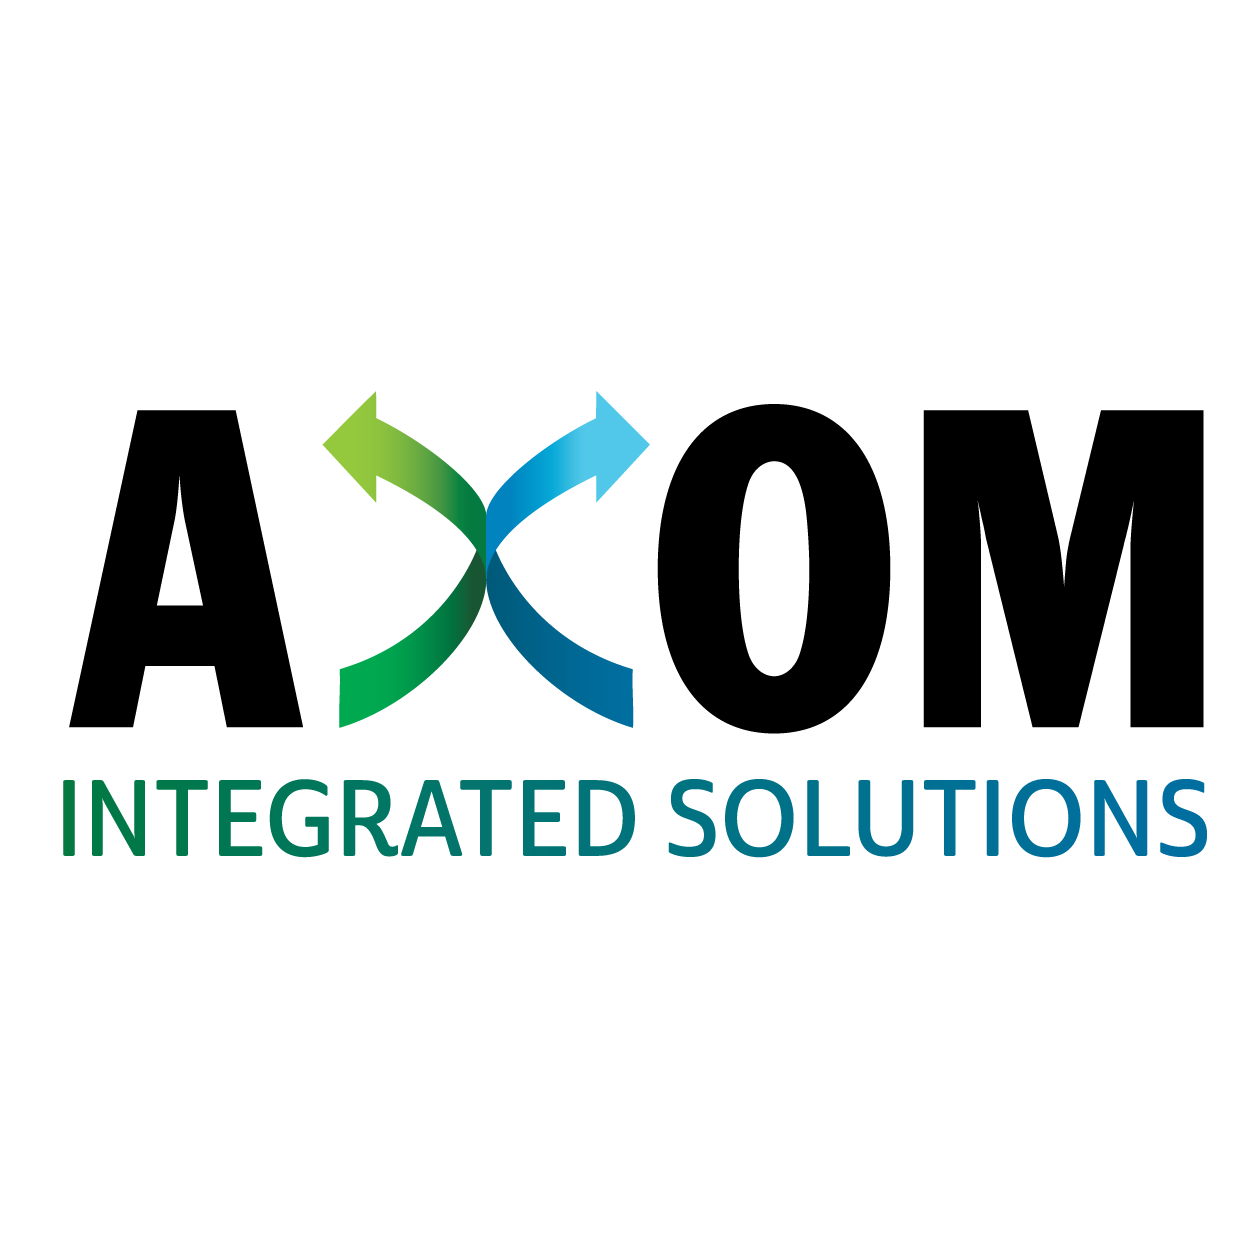 Axom Integrated Solutions